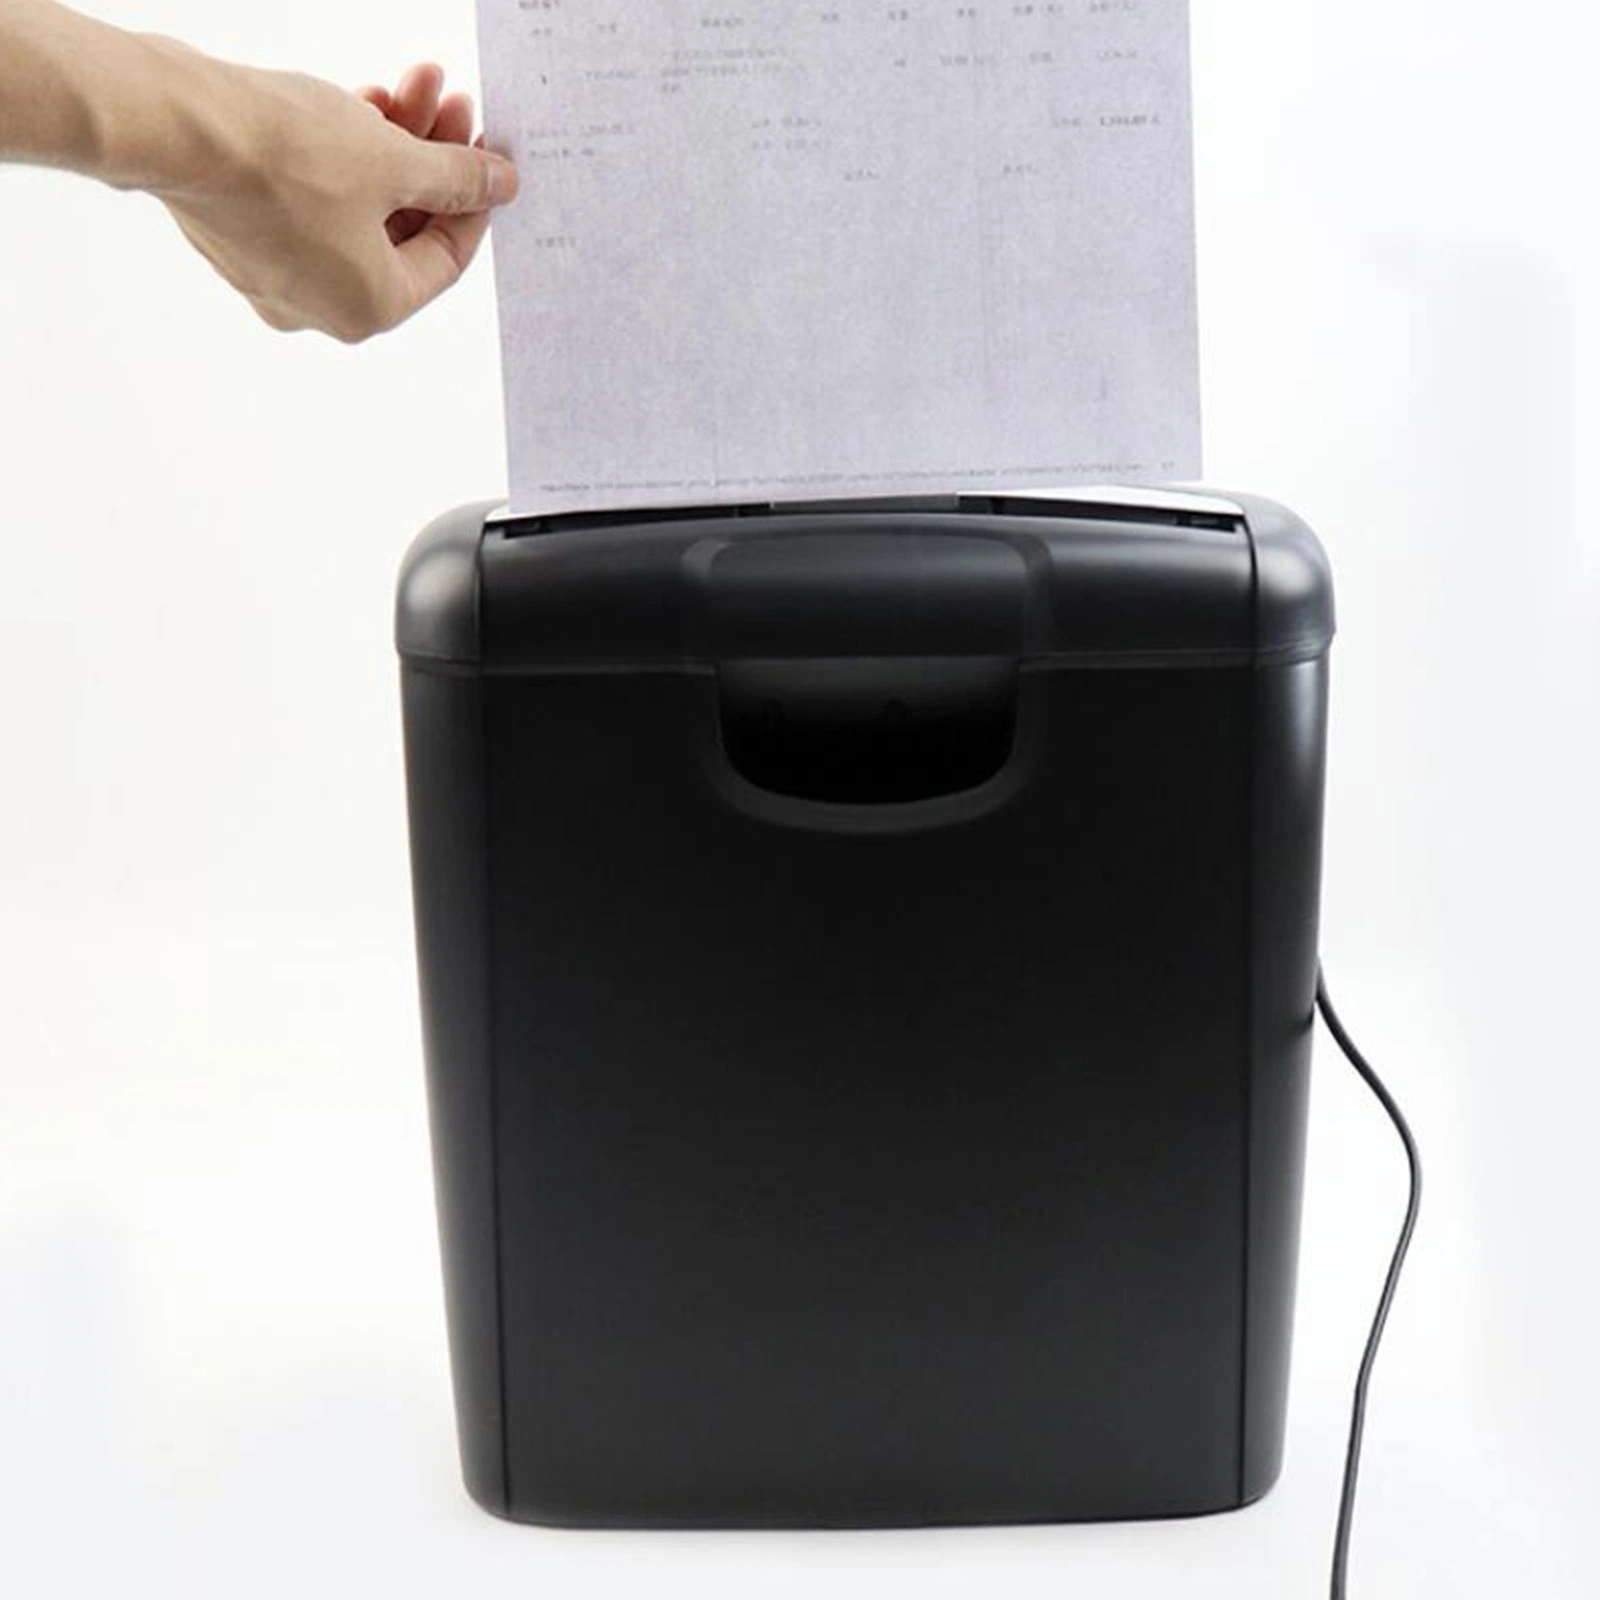 Small Paper Shredders: Compact Solutions插图